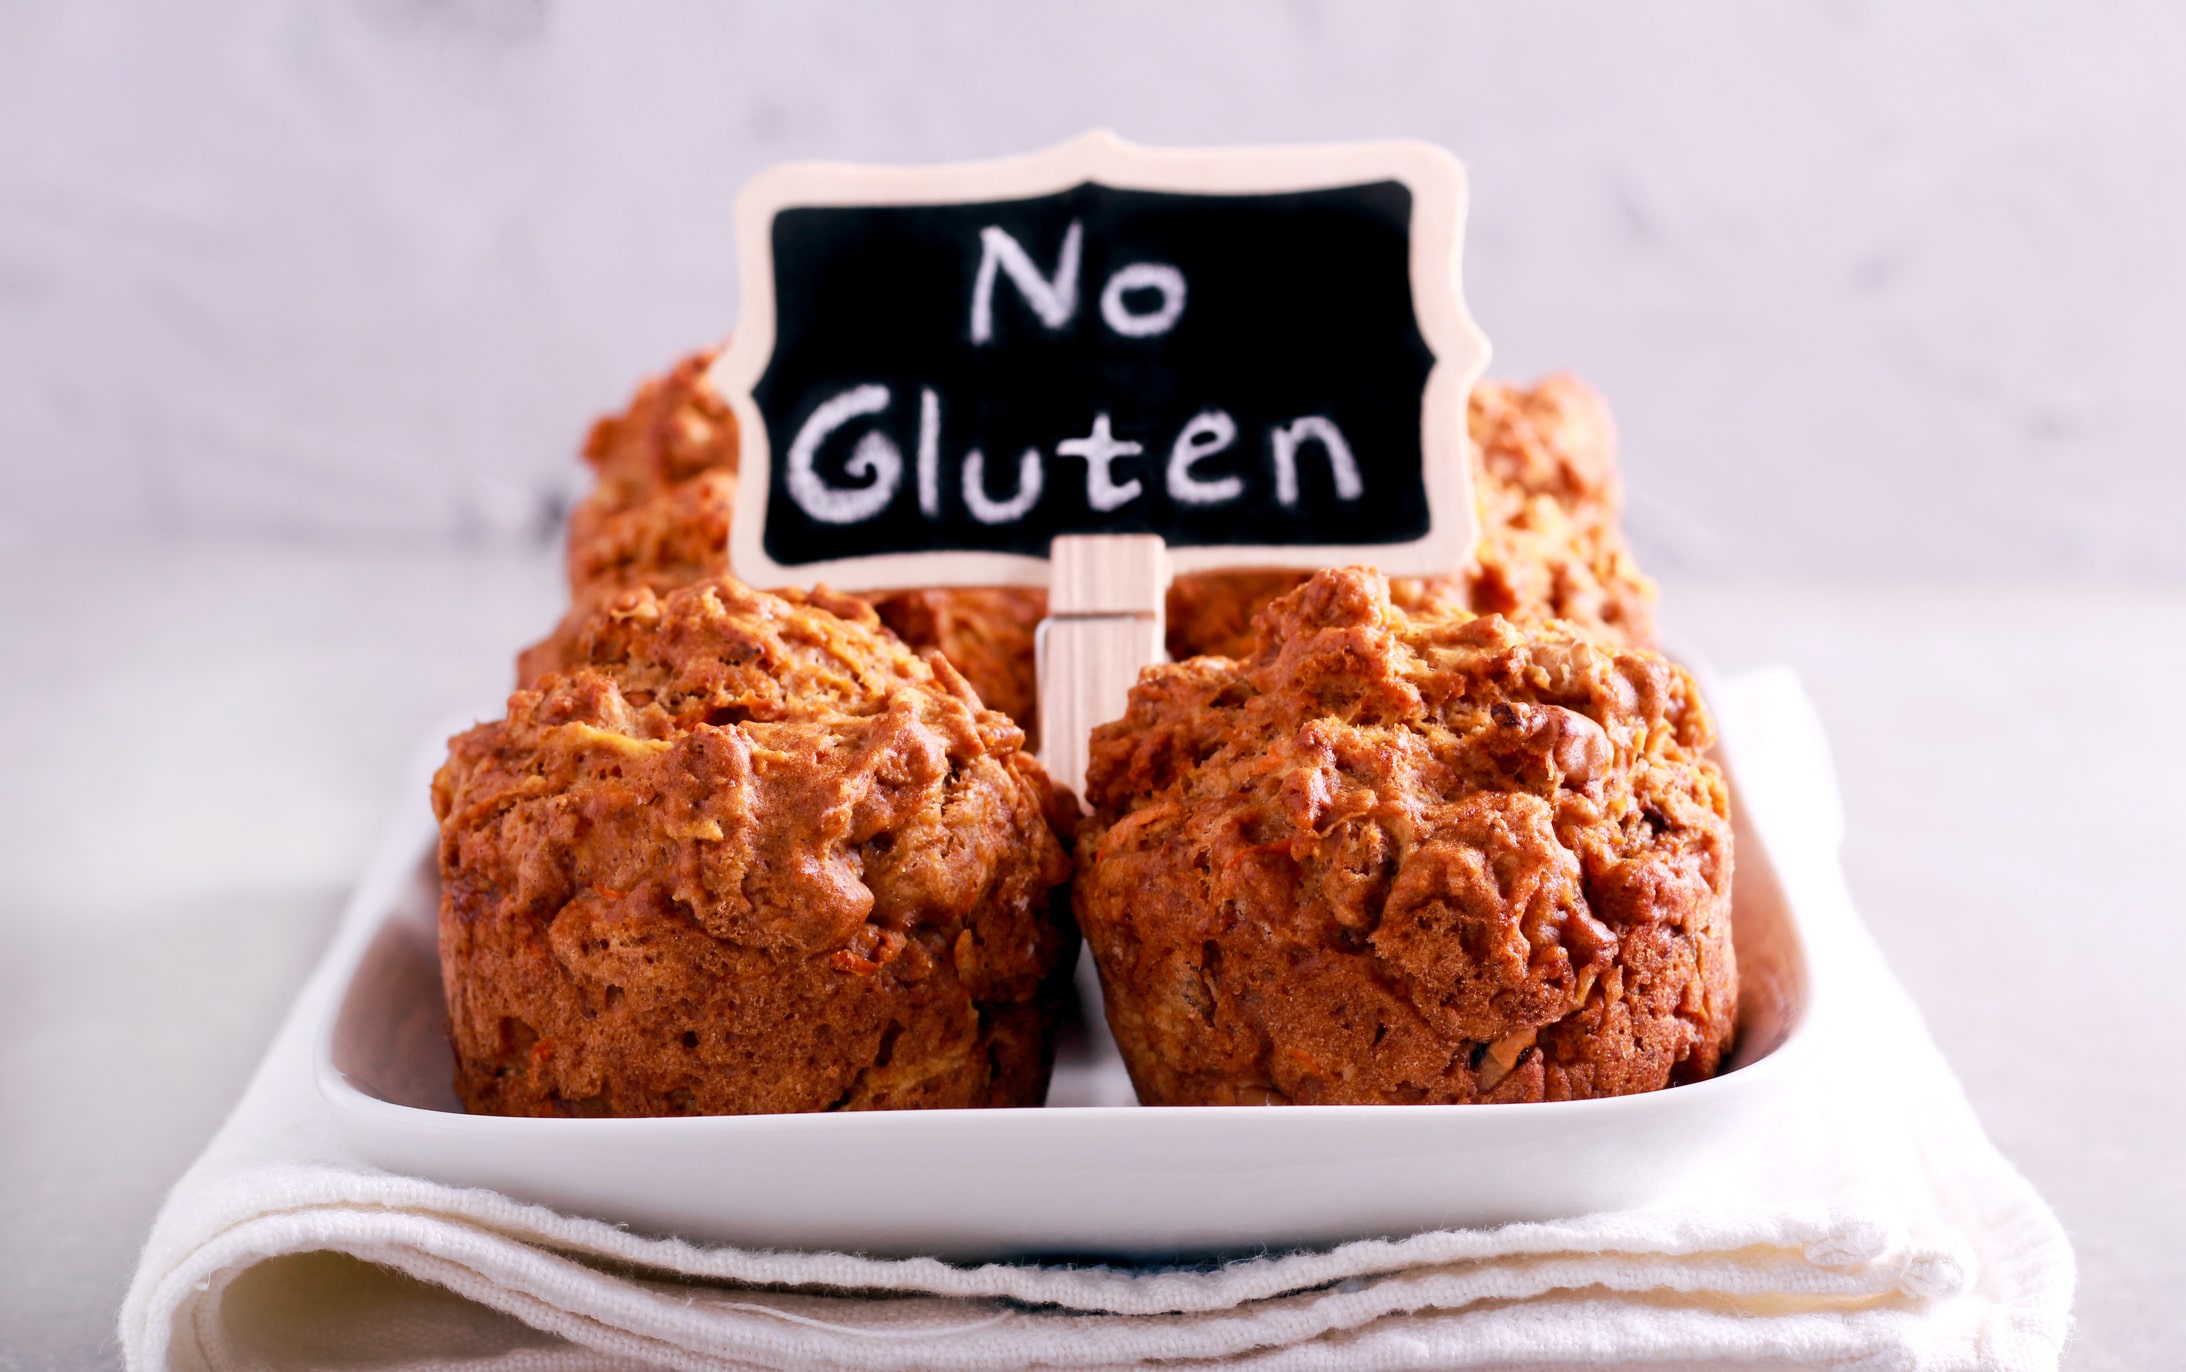 Why a Gluten-Free Diet May Not B...